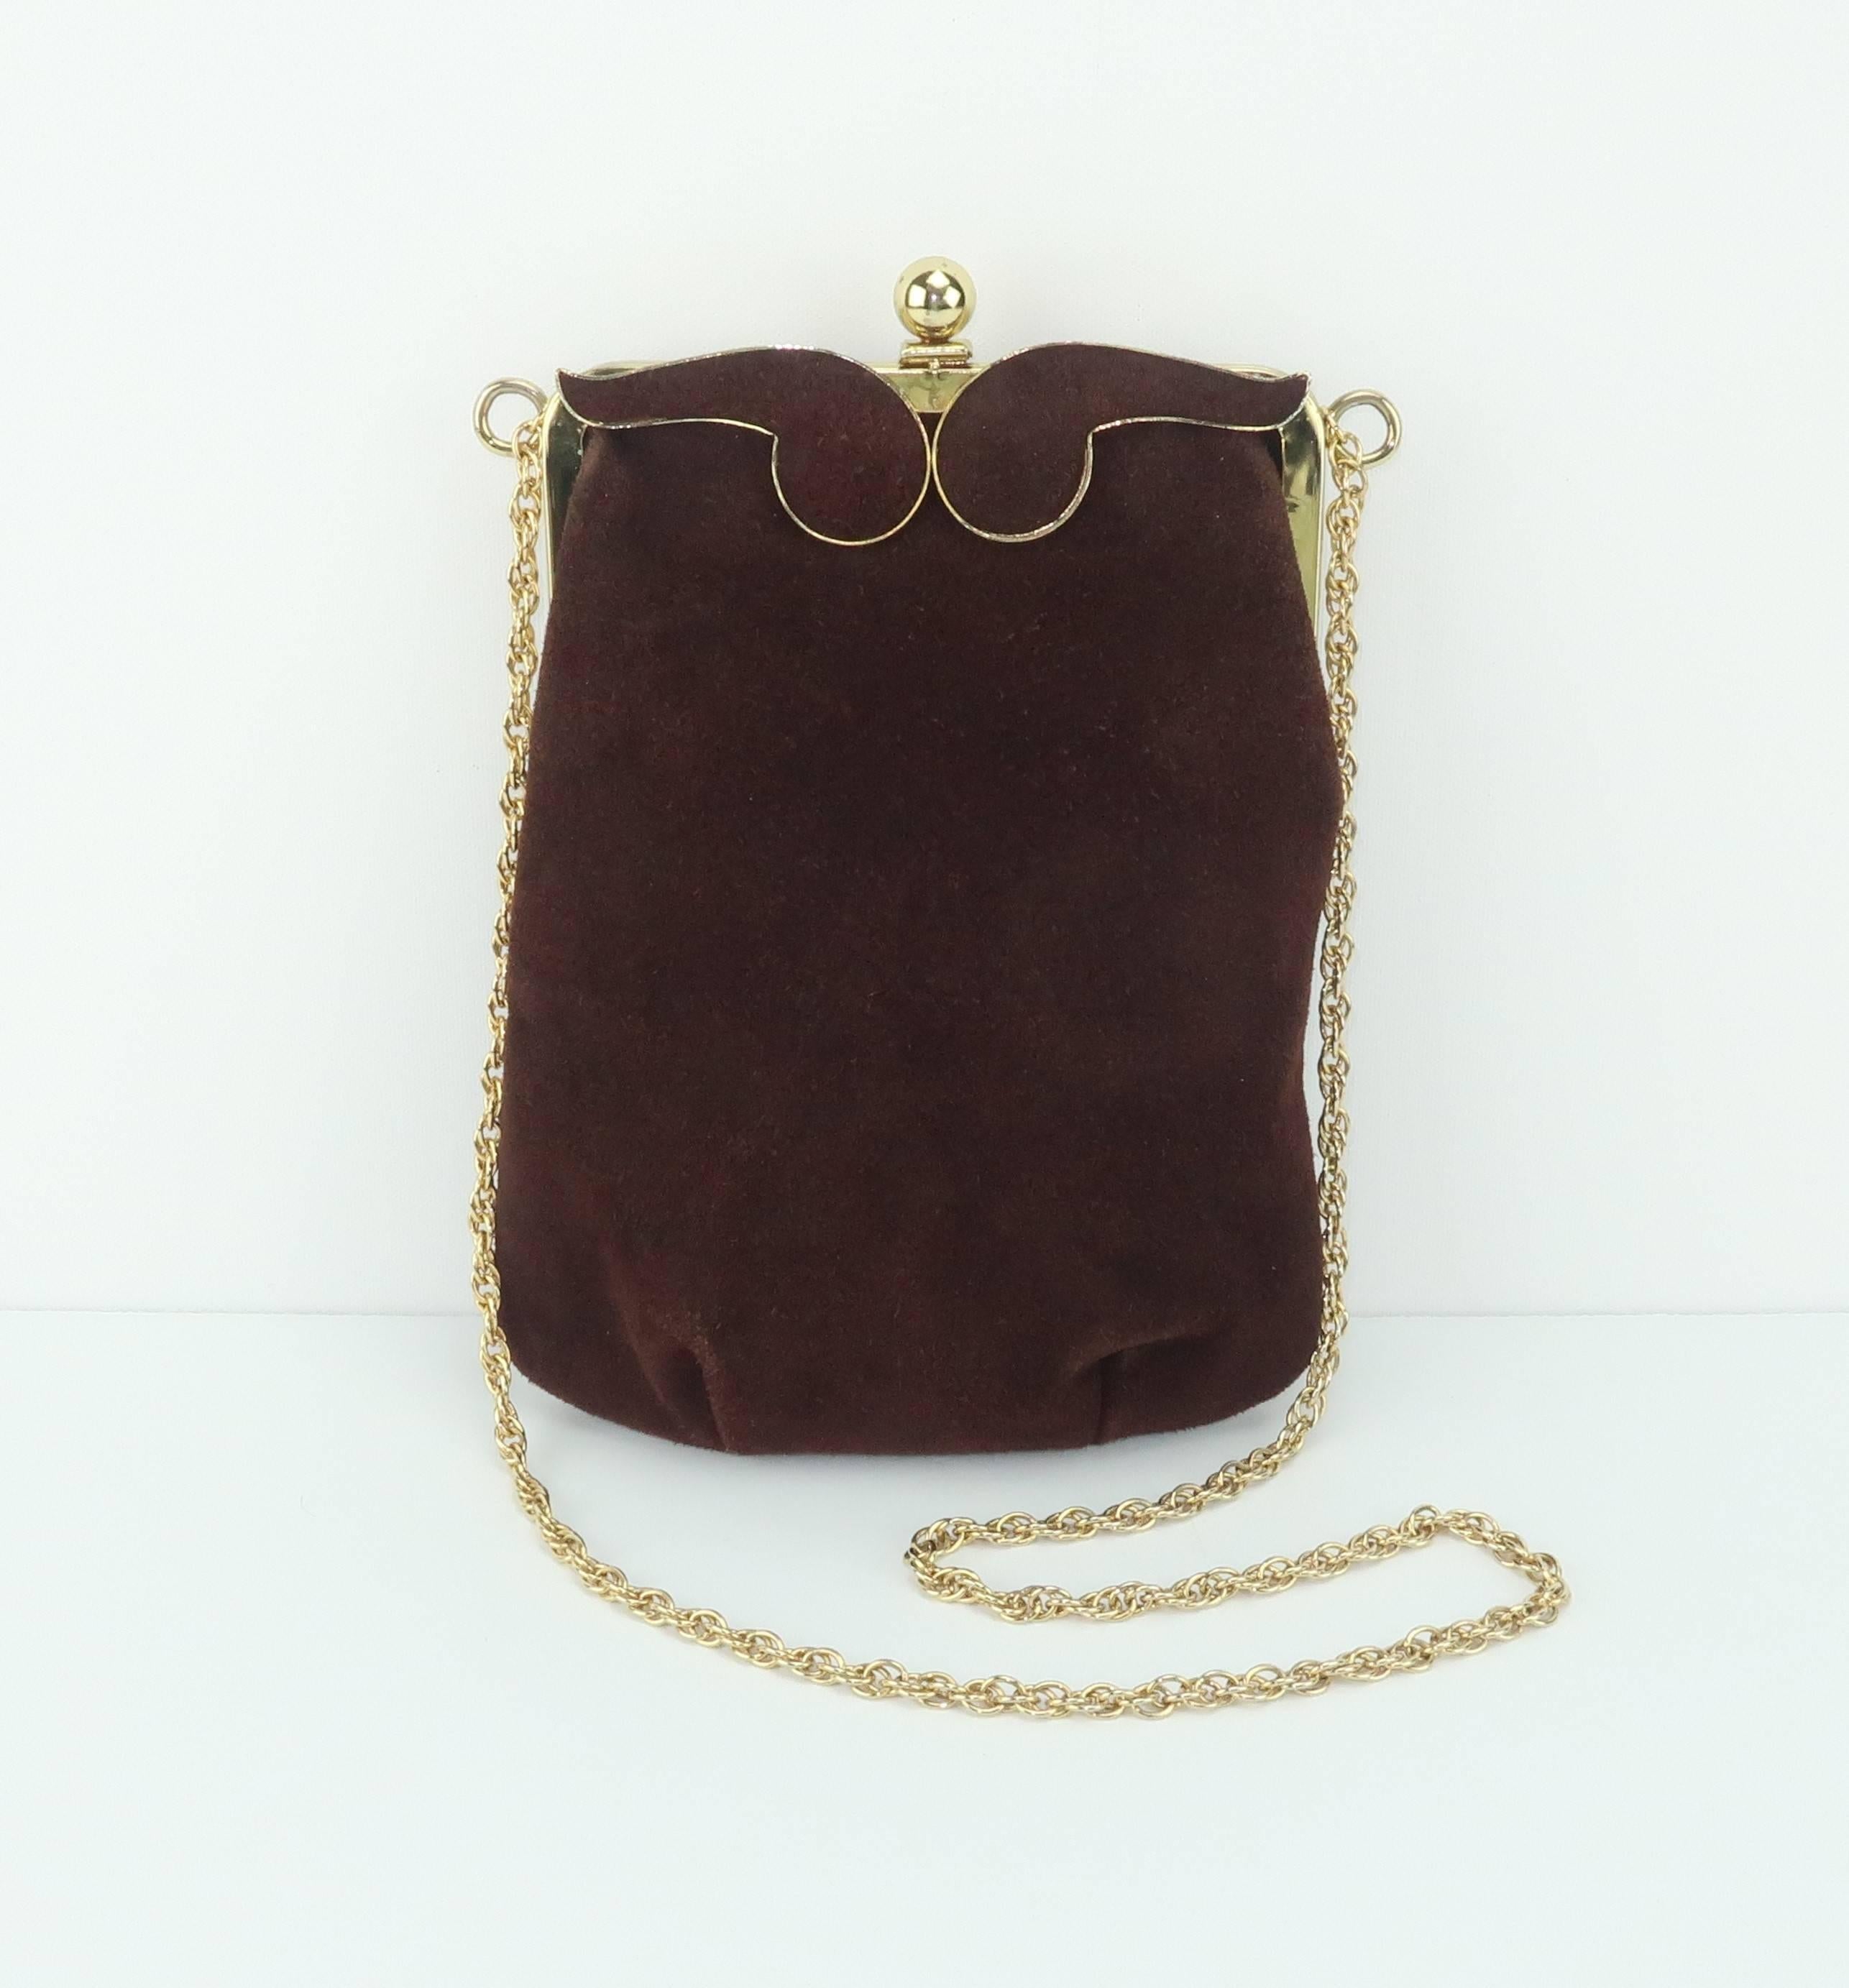 The details on this brown suede handbag by Triangle, New York are eye catching and as fashionable today as they were in the 1960's.  Triangle had a reputation for producing affordable handbags with unique features that mimicked the higher end